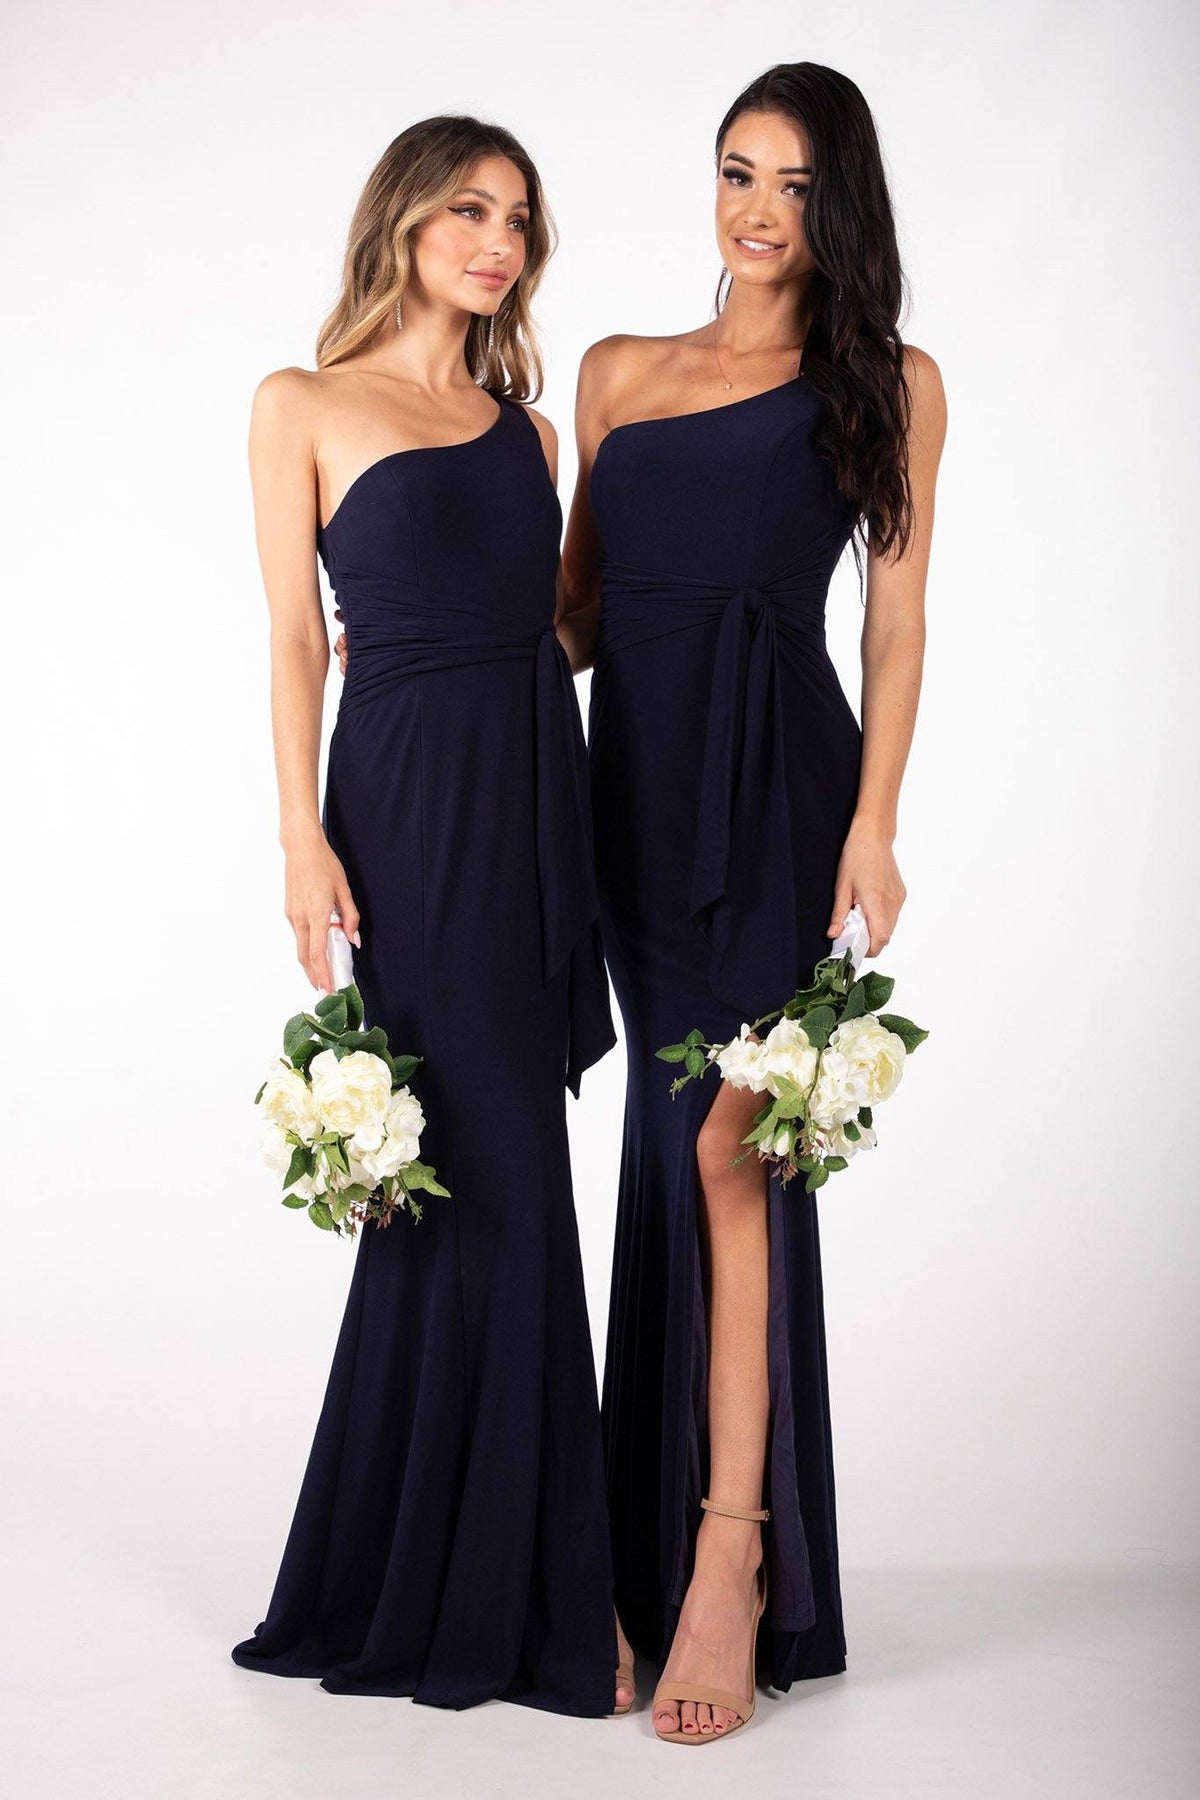 Navy Bridesmaids One Shoulder Maxi-Length Dress with Asymmetrical Neckline, Waist Tie, Above Knee High Slit, and a Column Styled Silhouette